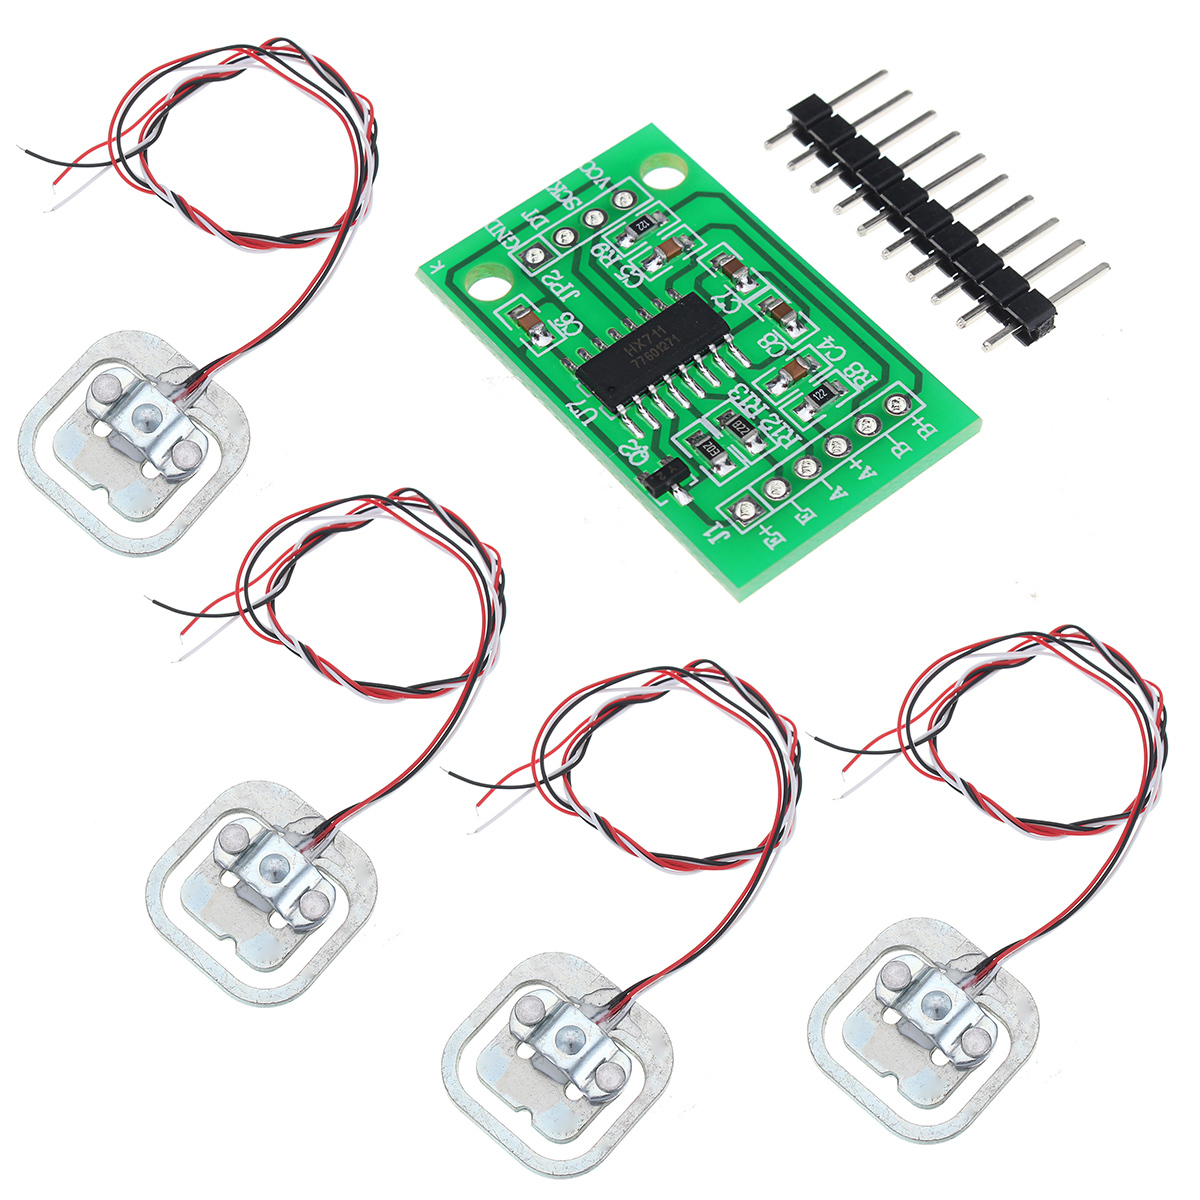 4pcs DIY 50KG Body Load Cell Weight Strain Sensor Resistance With HX711 AD Module 1